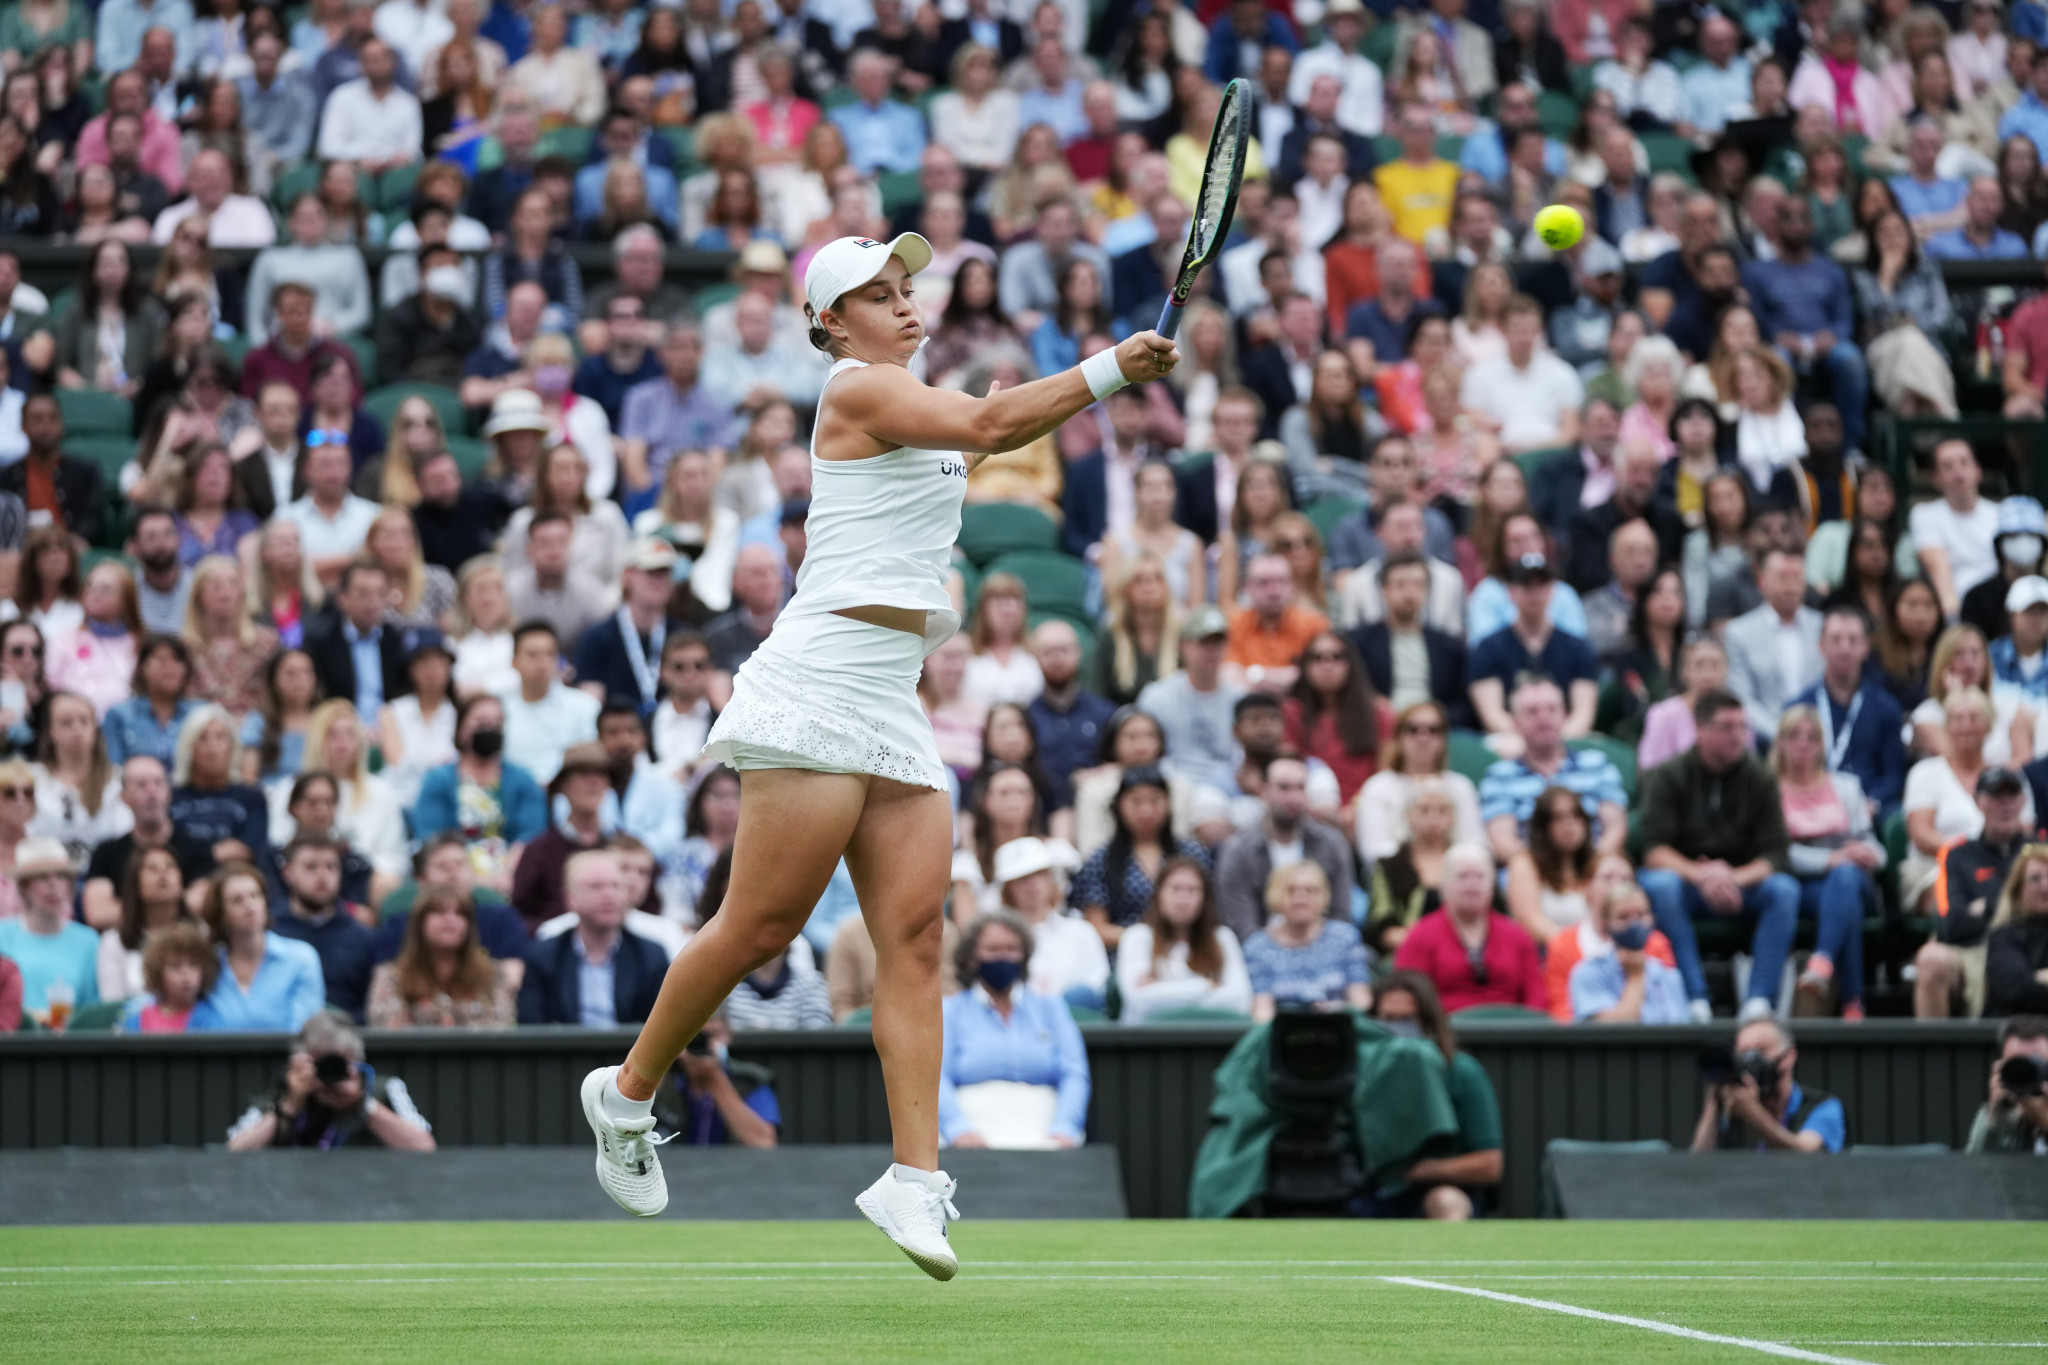 Top two seeds reach women’s semi-finals as Wimbledon welcomes back capacity crowds